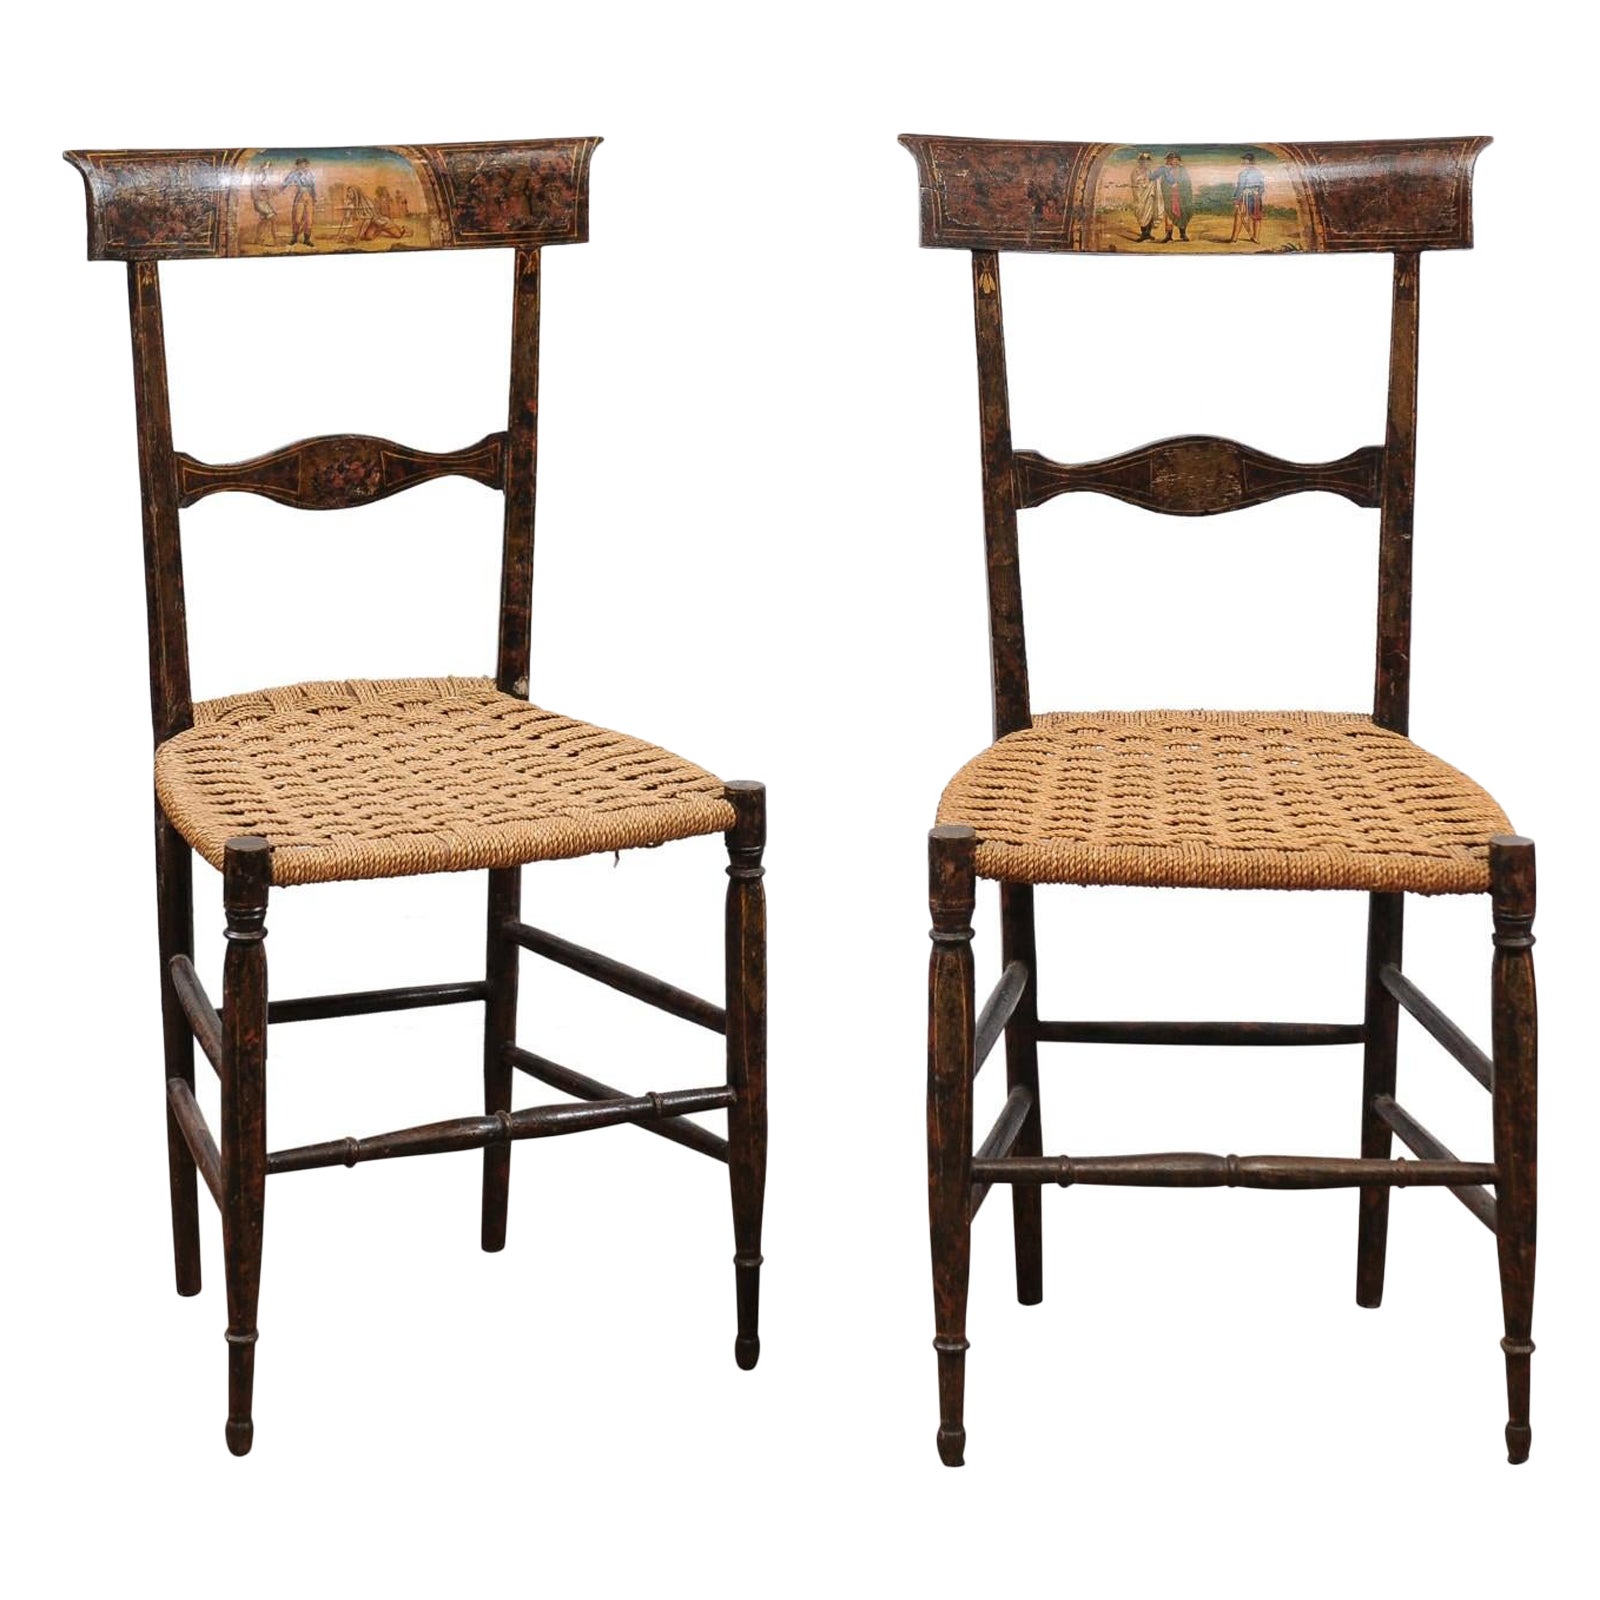 Pair of Neoclassical Black Painted Side Chairs with Woven Seats, Italy ca. 1790